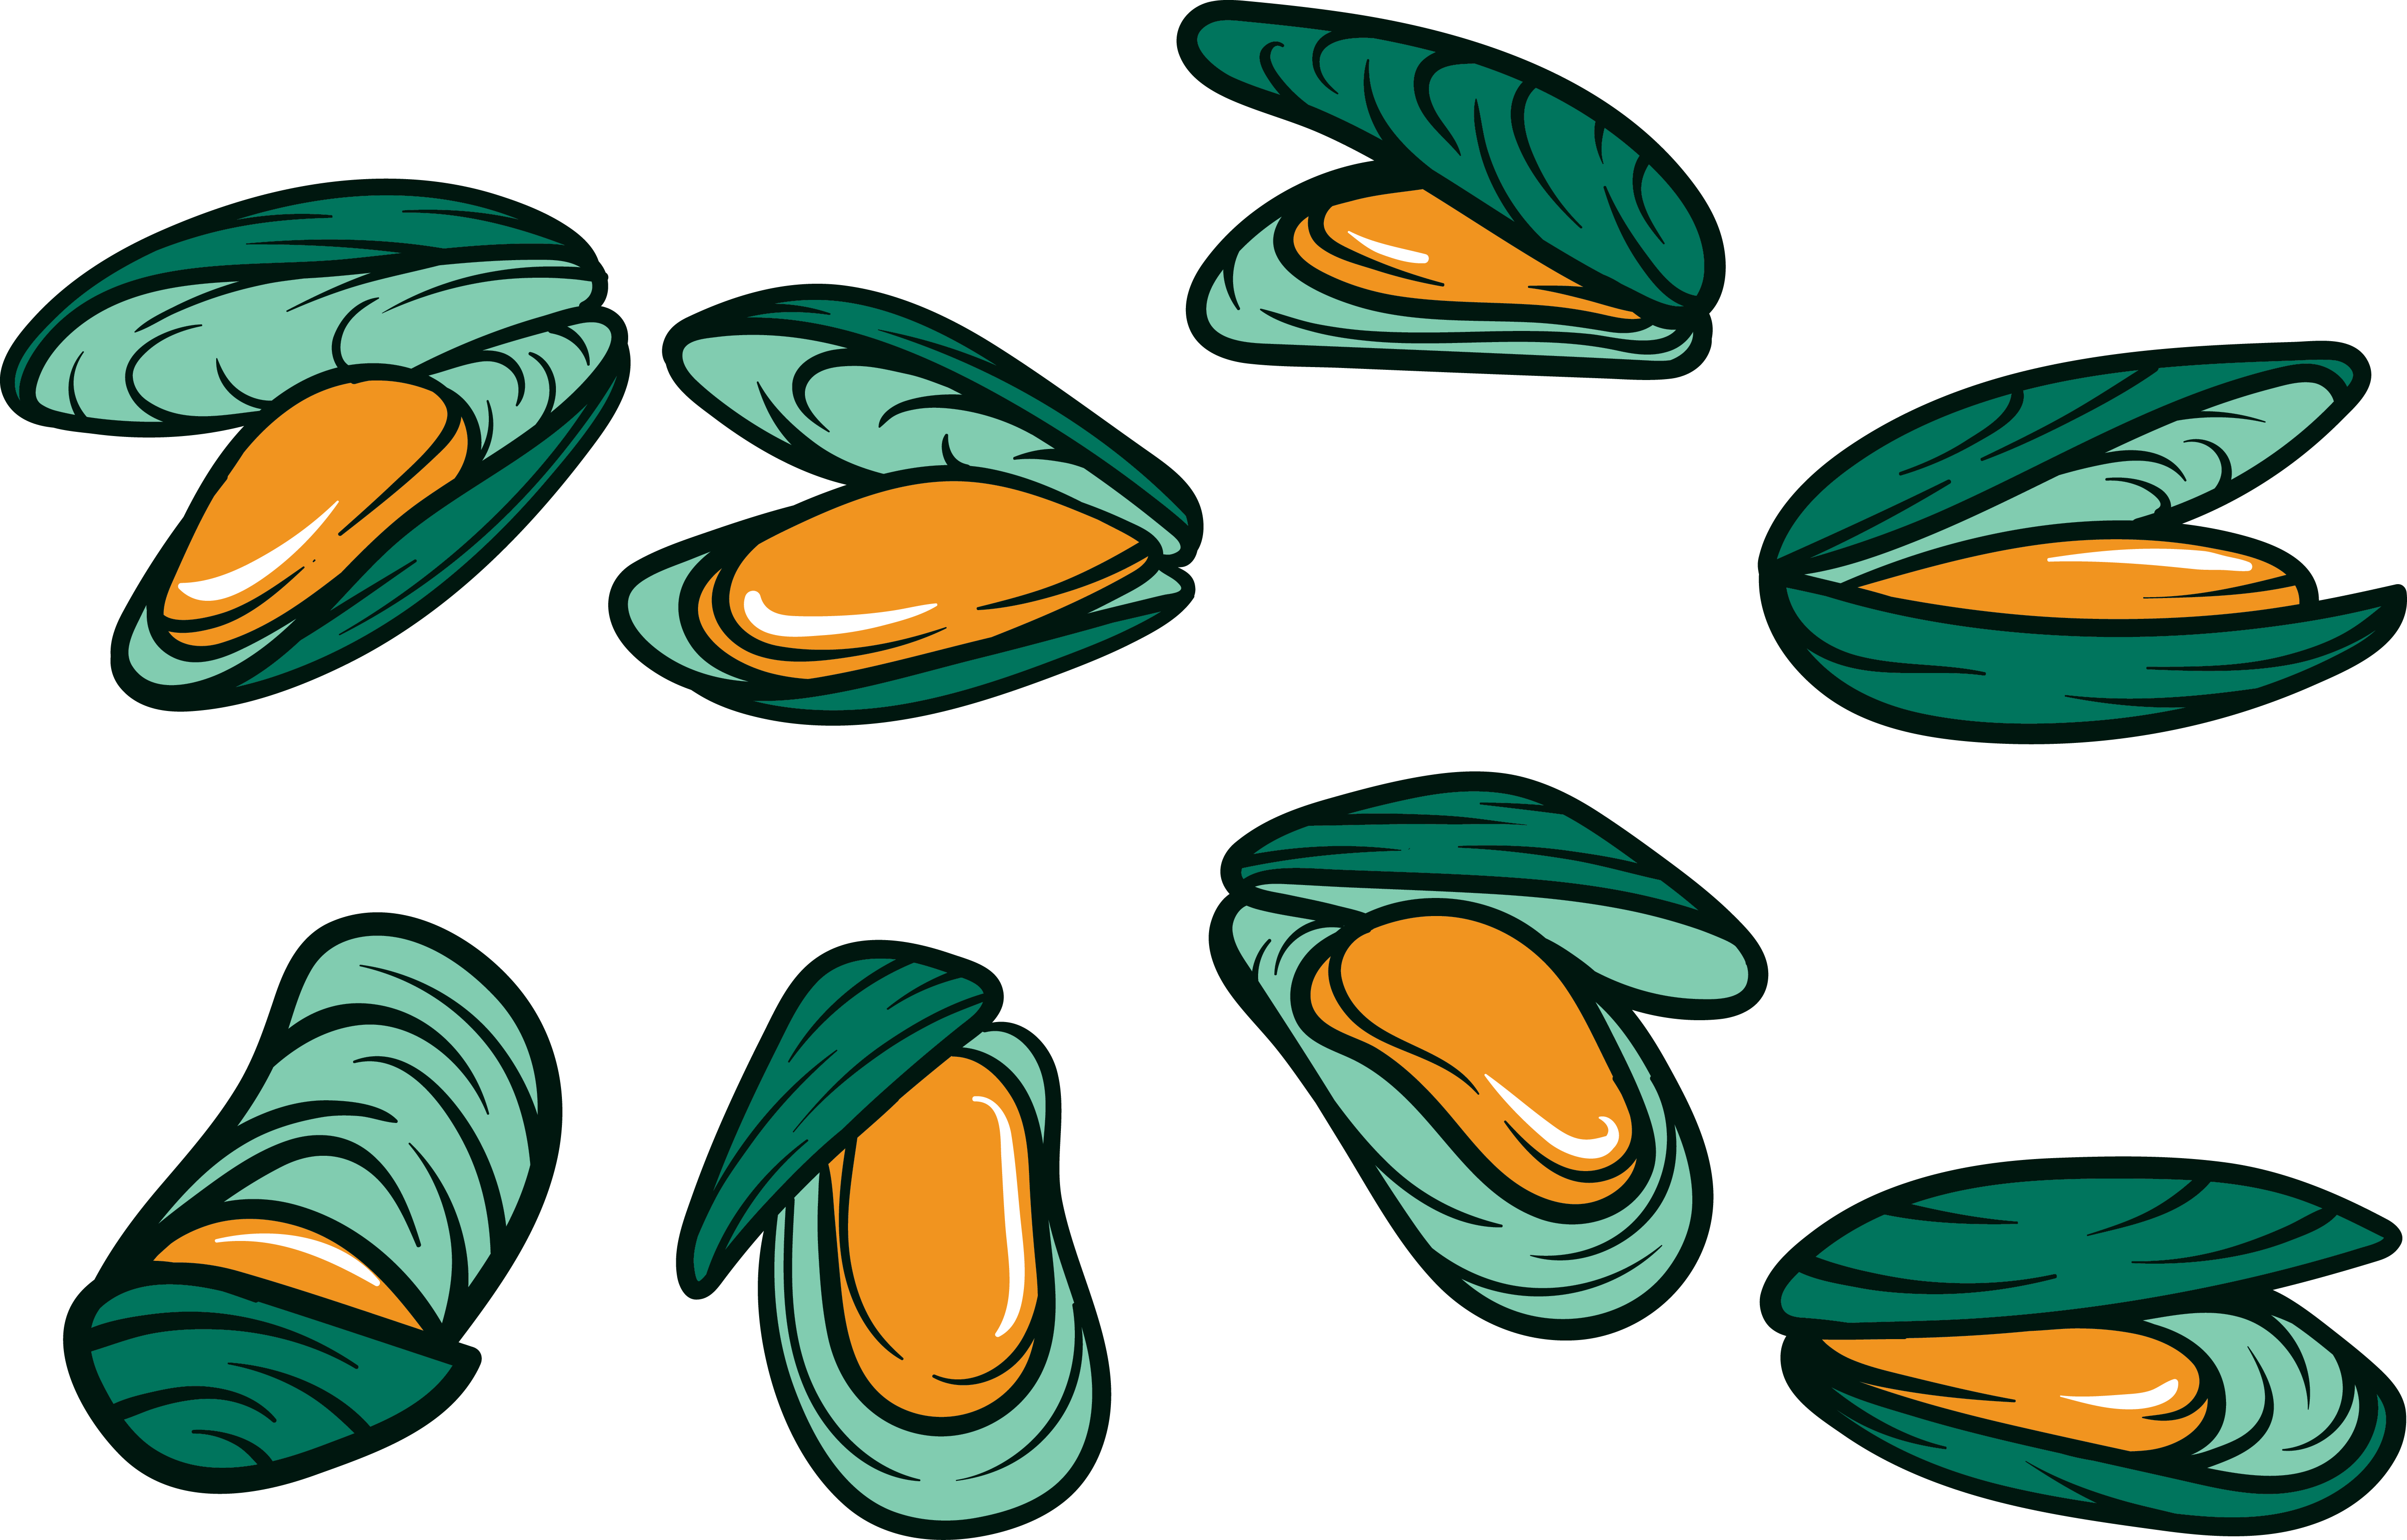 Mussel Seafood Oyster Squid Clip Art - Mussel Seafood Oyster Squid Clip Art (5200x3327)